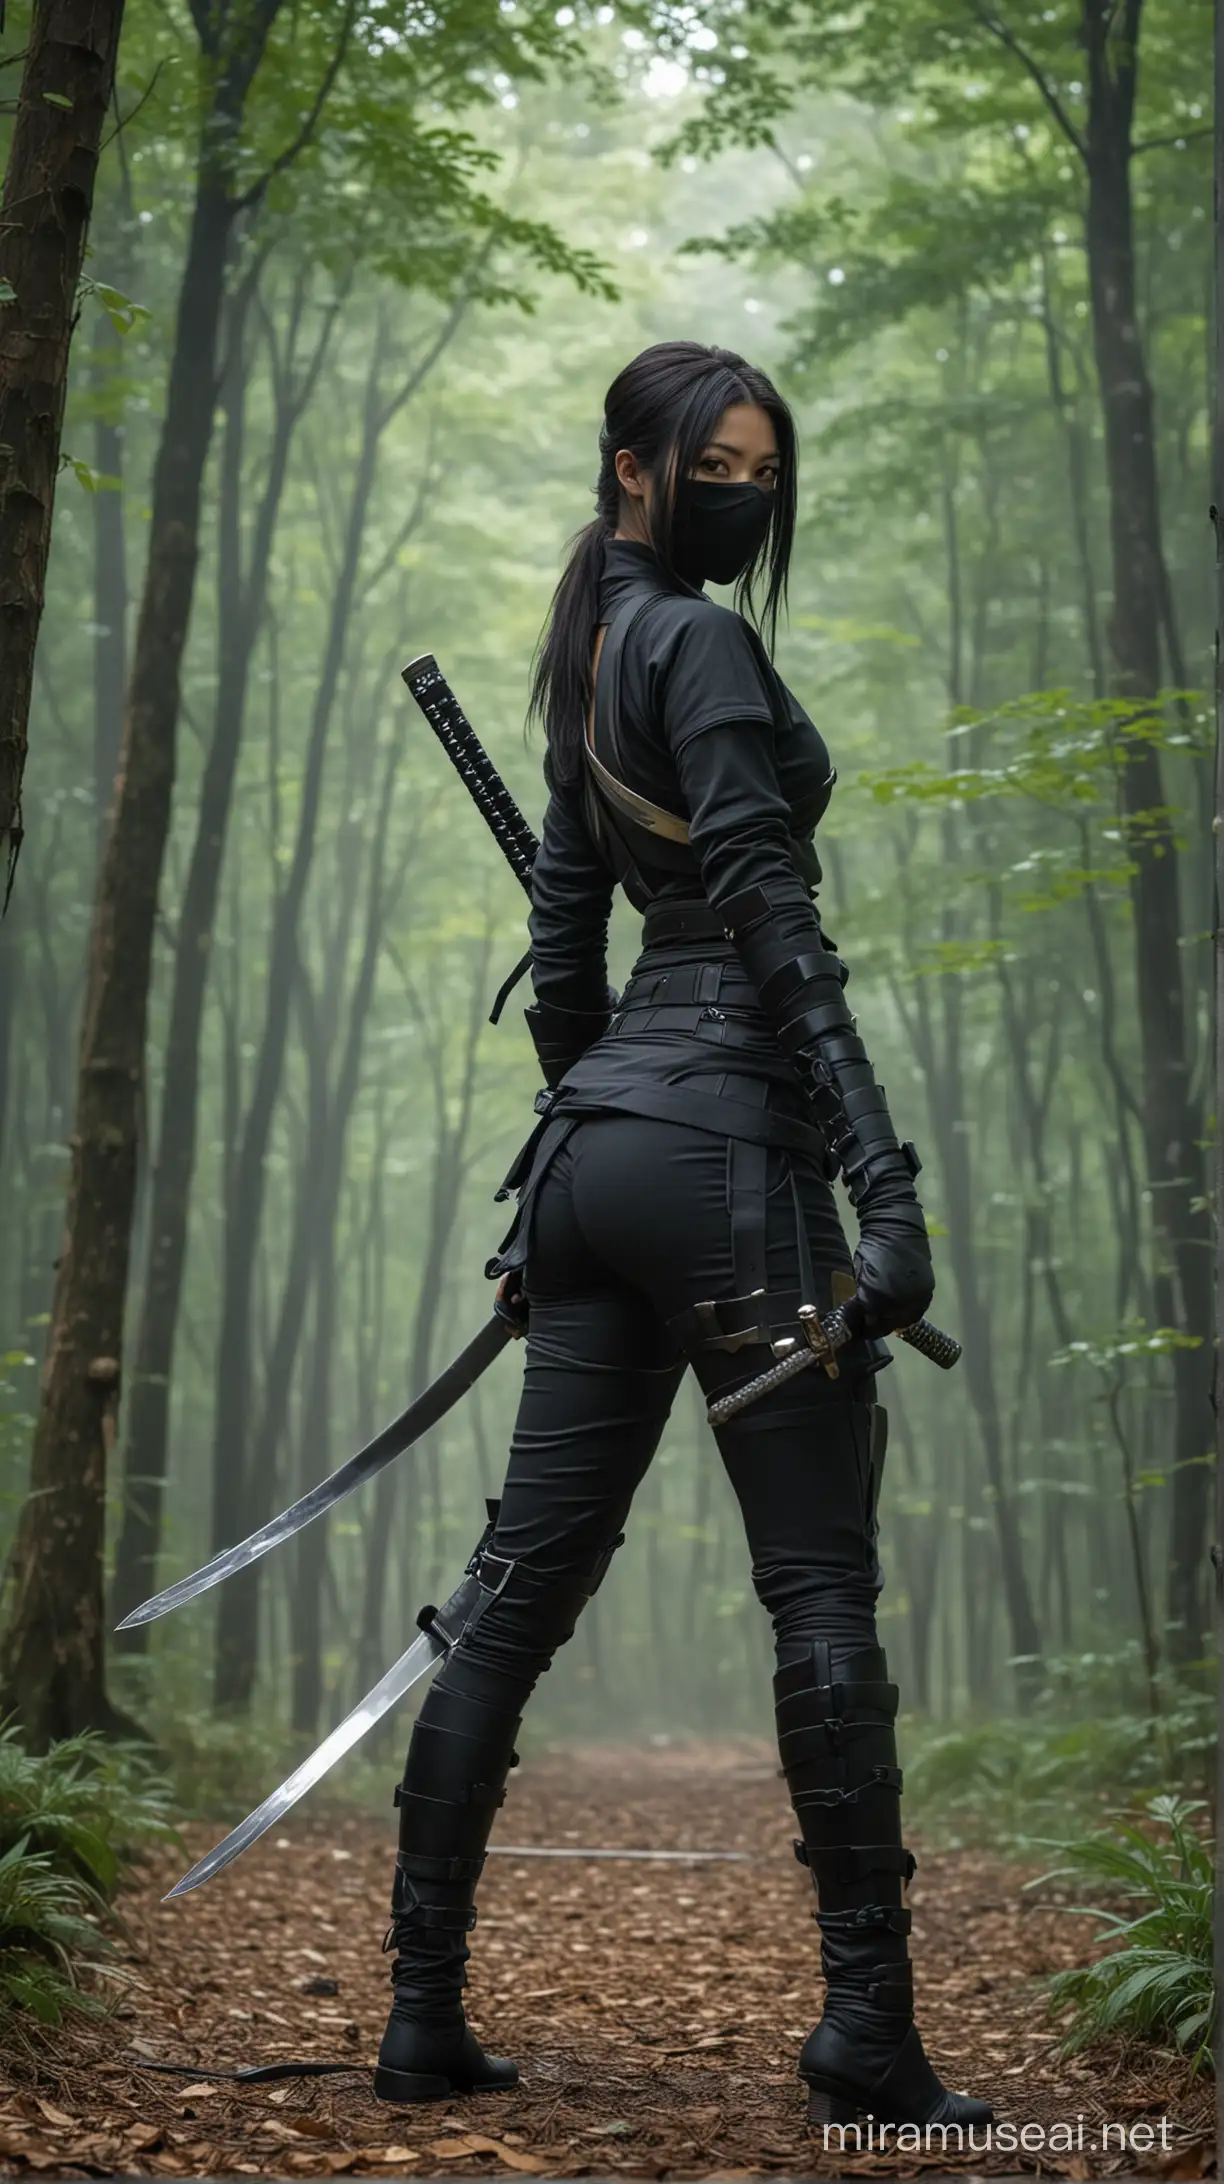 Mysterious Female Ninja in Lush Green Forest